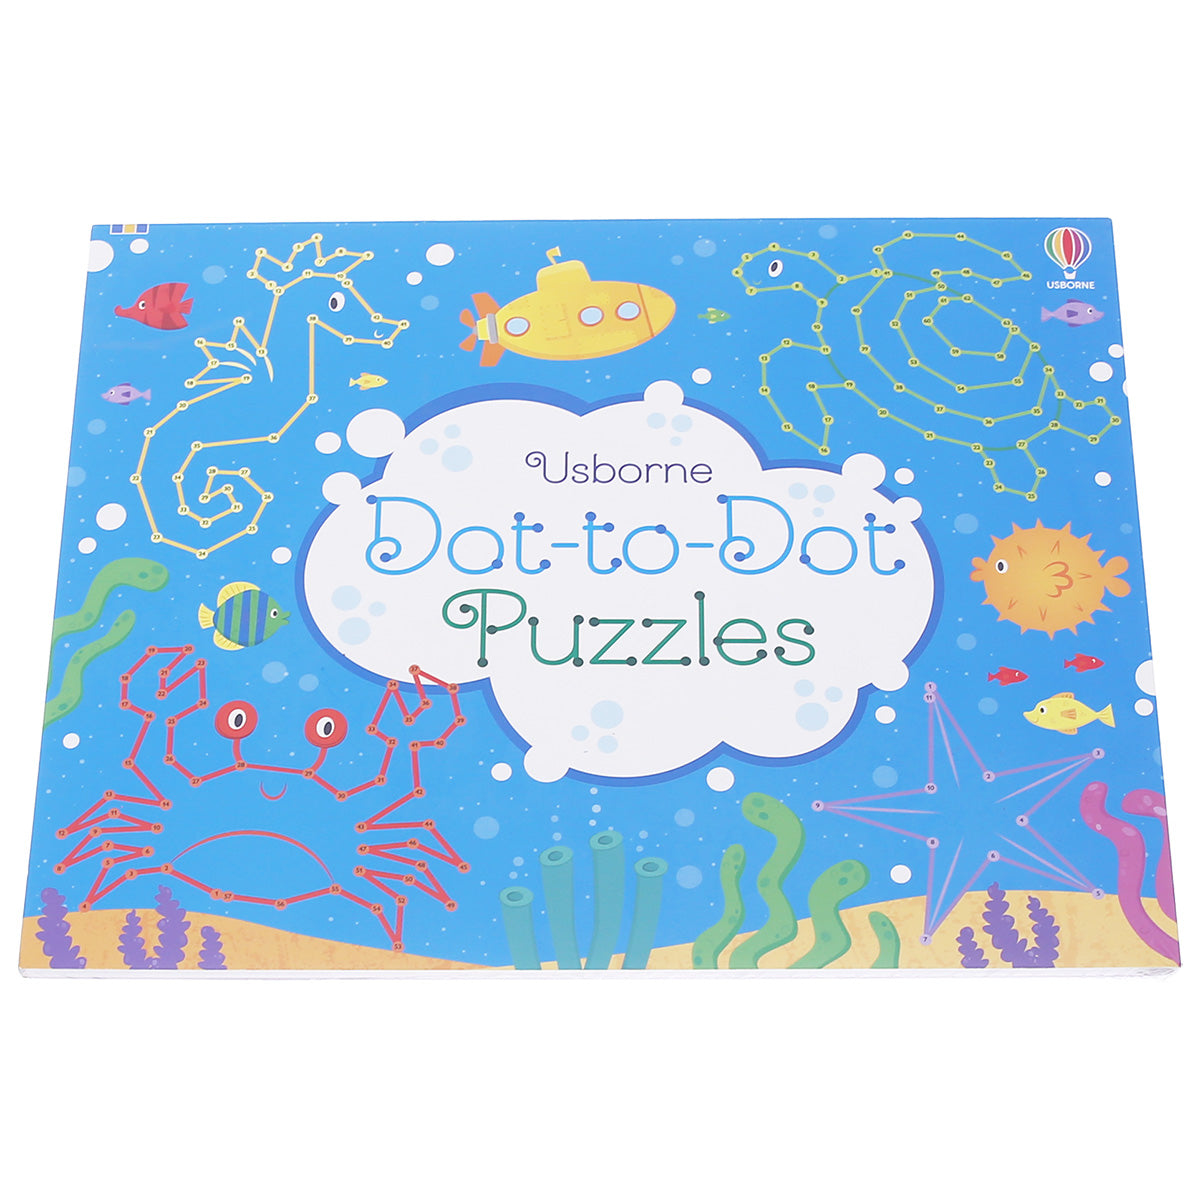 DOT-TO-DOT PUZZLES.9781474985512